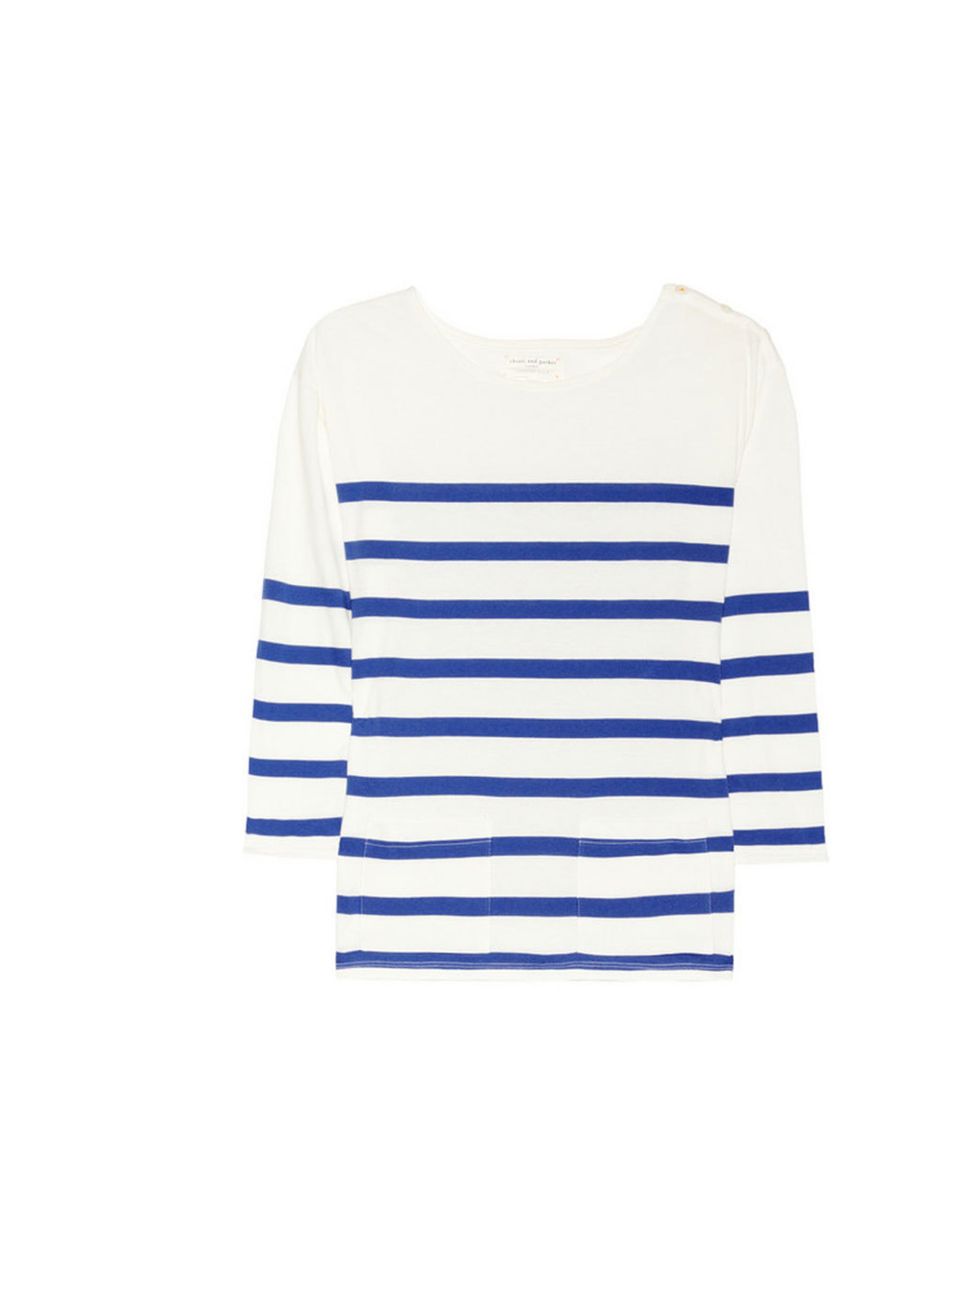 <p>You simply cant beat the classic Breton. Style with the new season metallics or pastels for a simple, fresh update... Chinti &amp; Parker striped top, £80, at Net-a-Porter</p><p><a href="http://shopping.elleuk.com/browse?fts=chinti+%26+parker+striped+